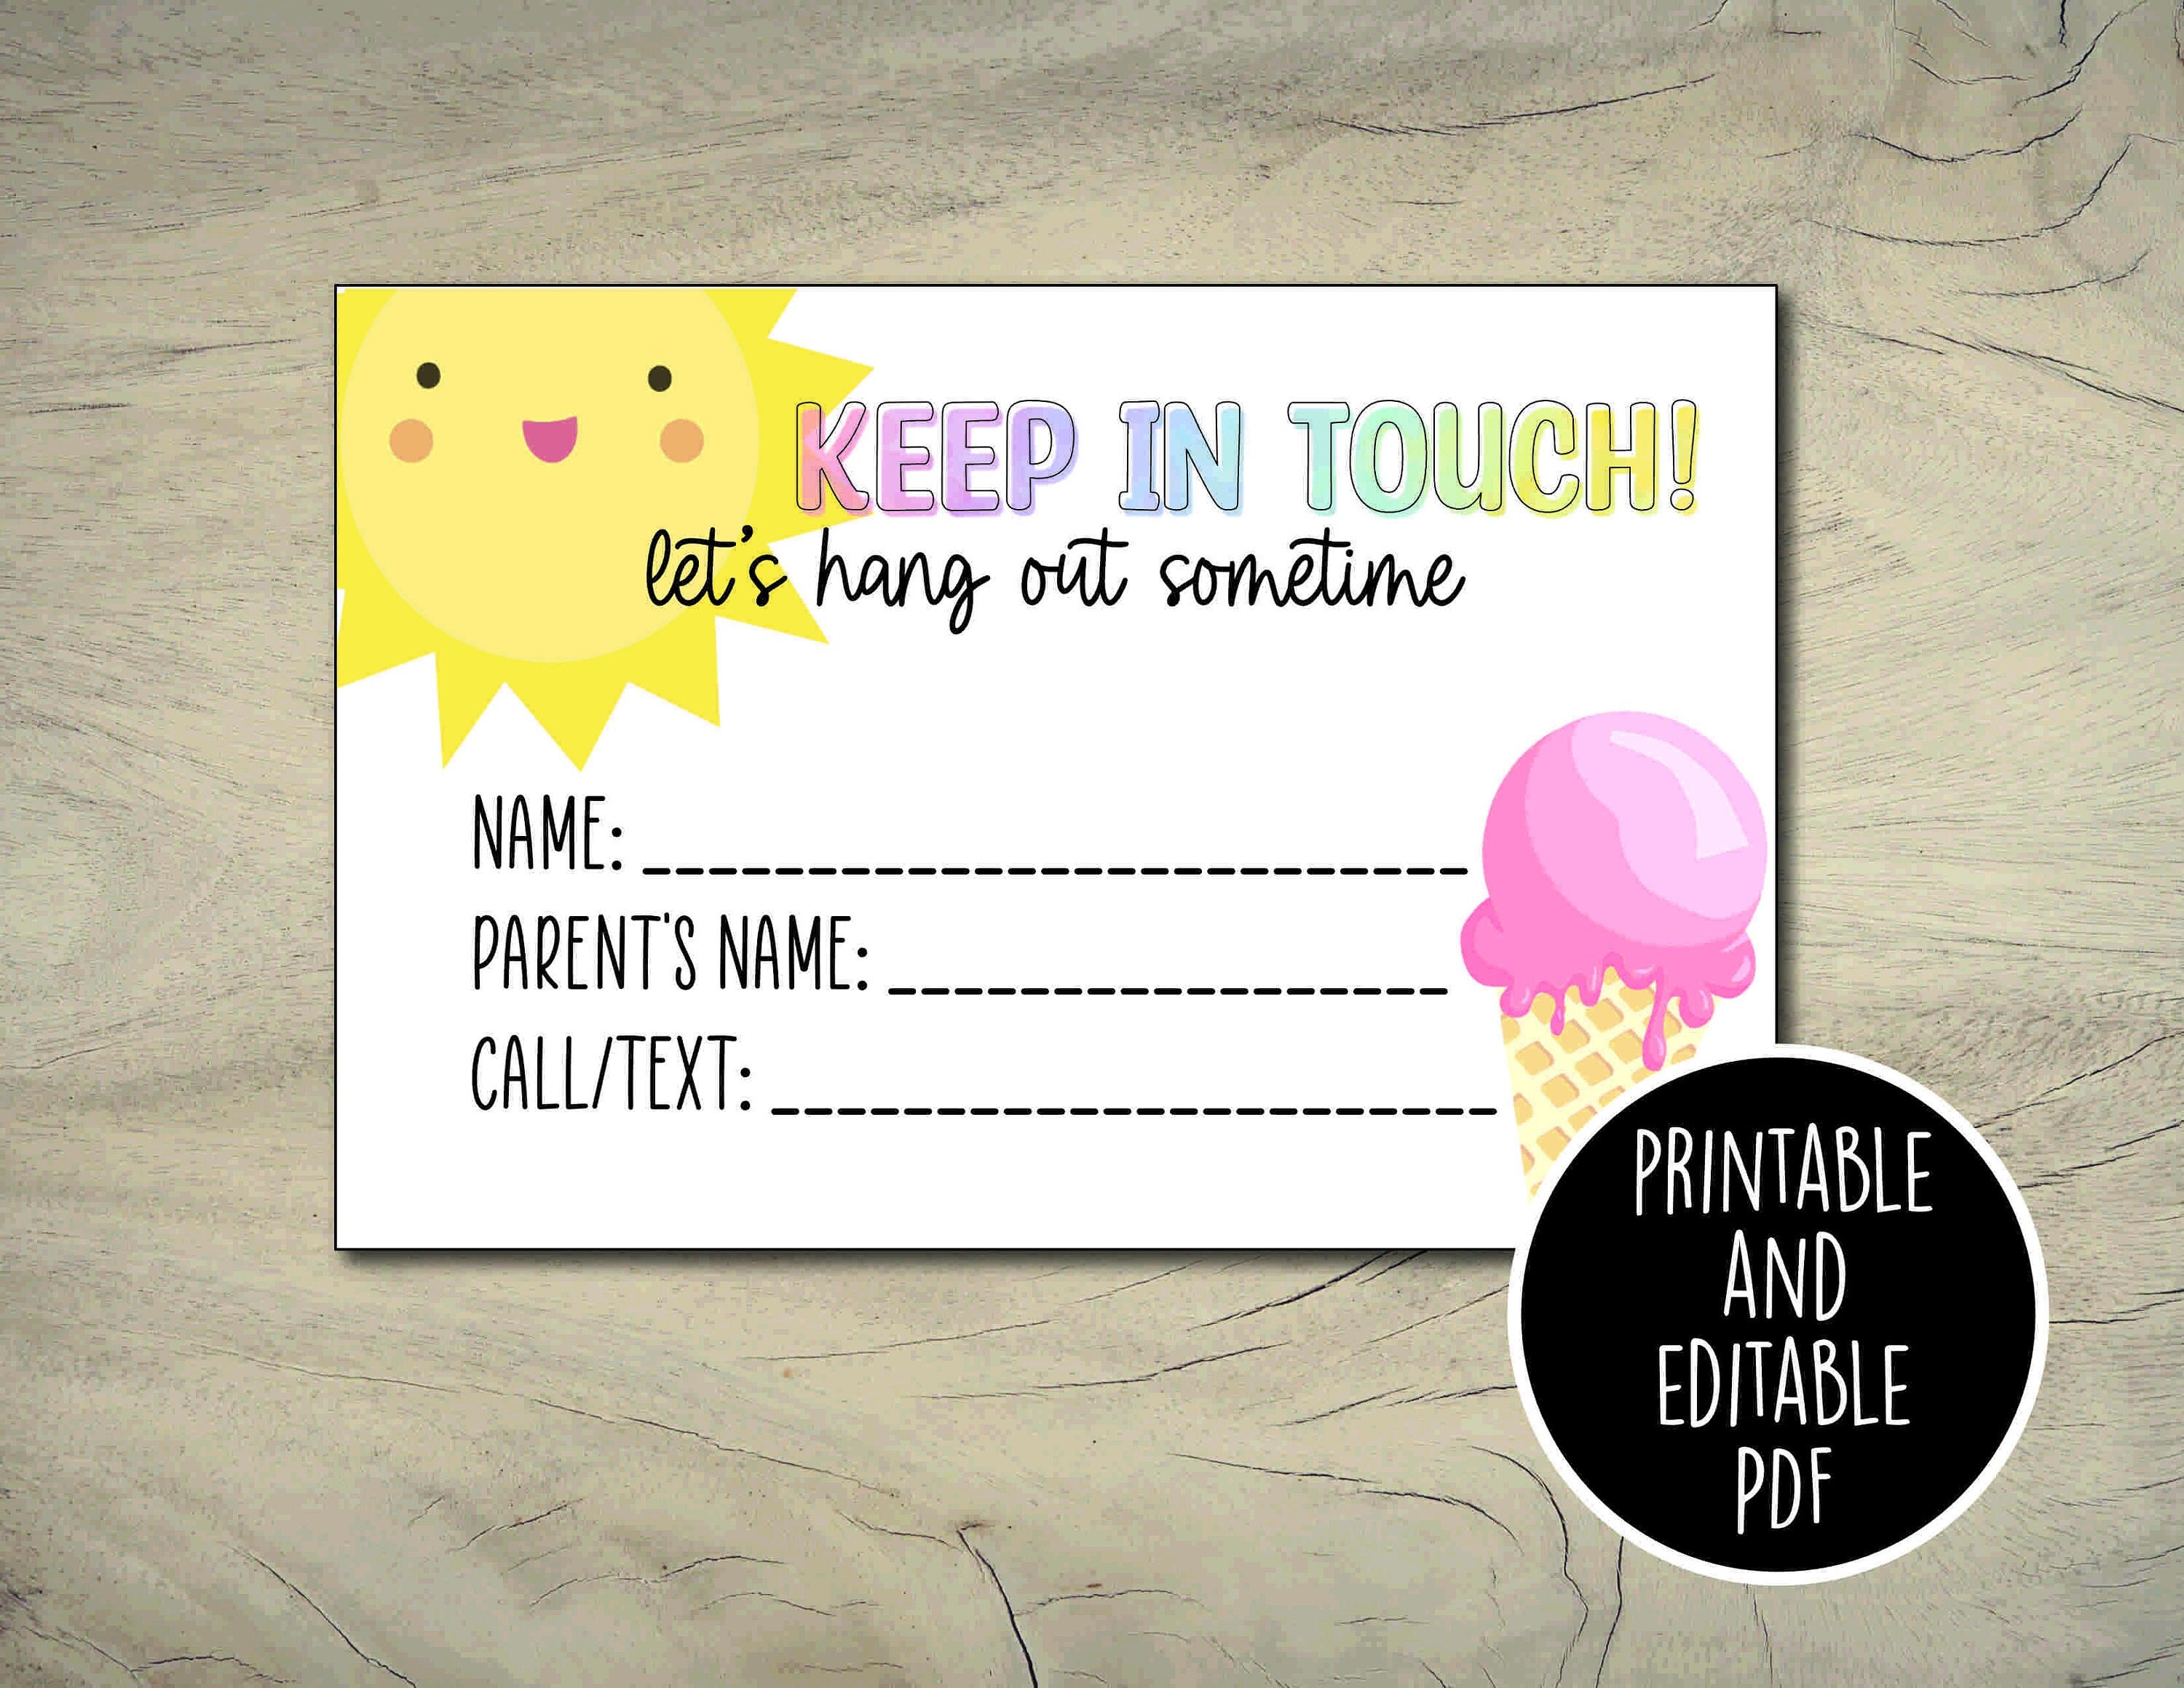 playdate-cards-summer-contact-cards-keep-in-touch-cards-end-etsy